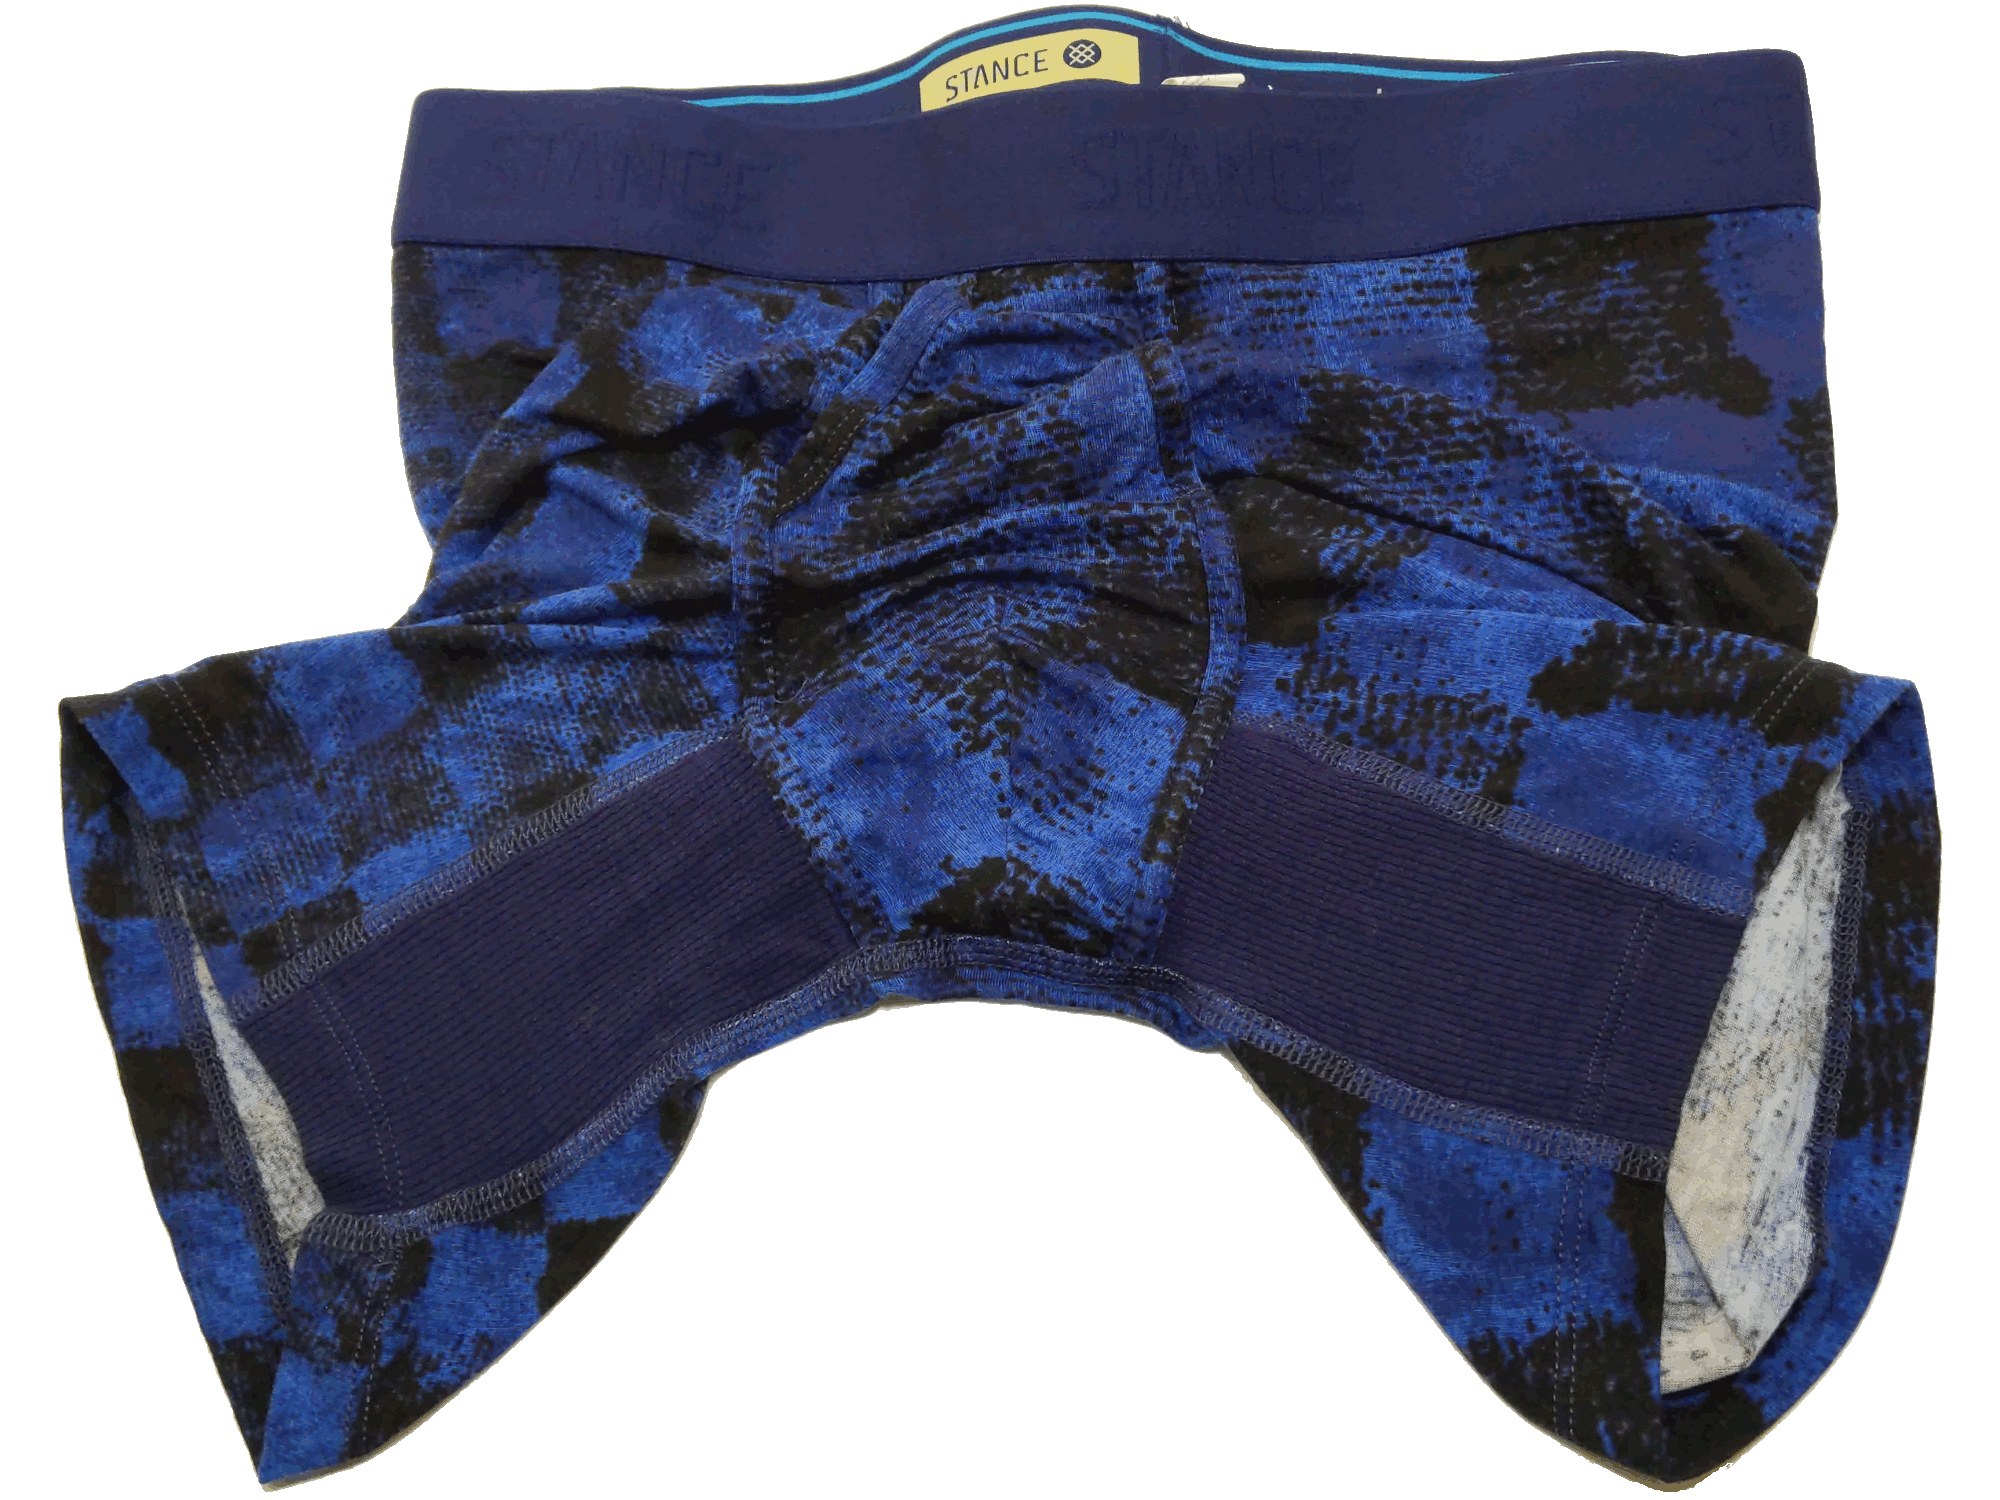 Stance Boxers